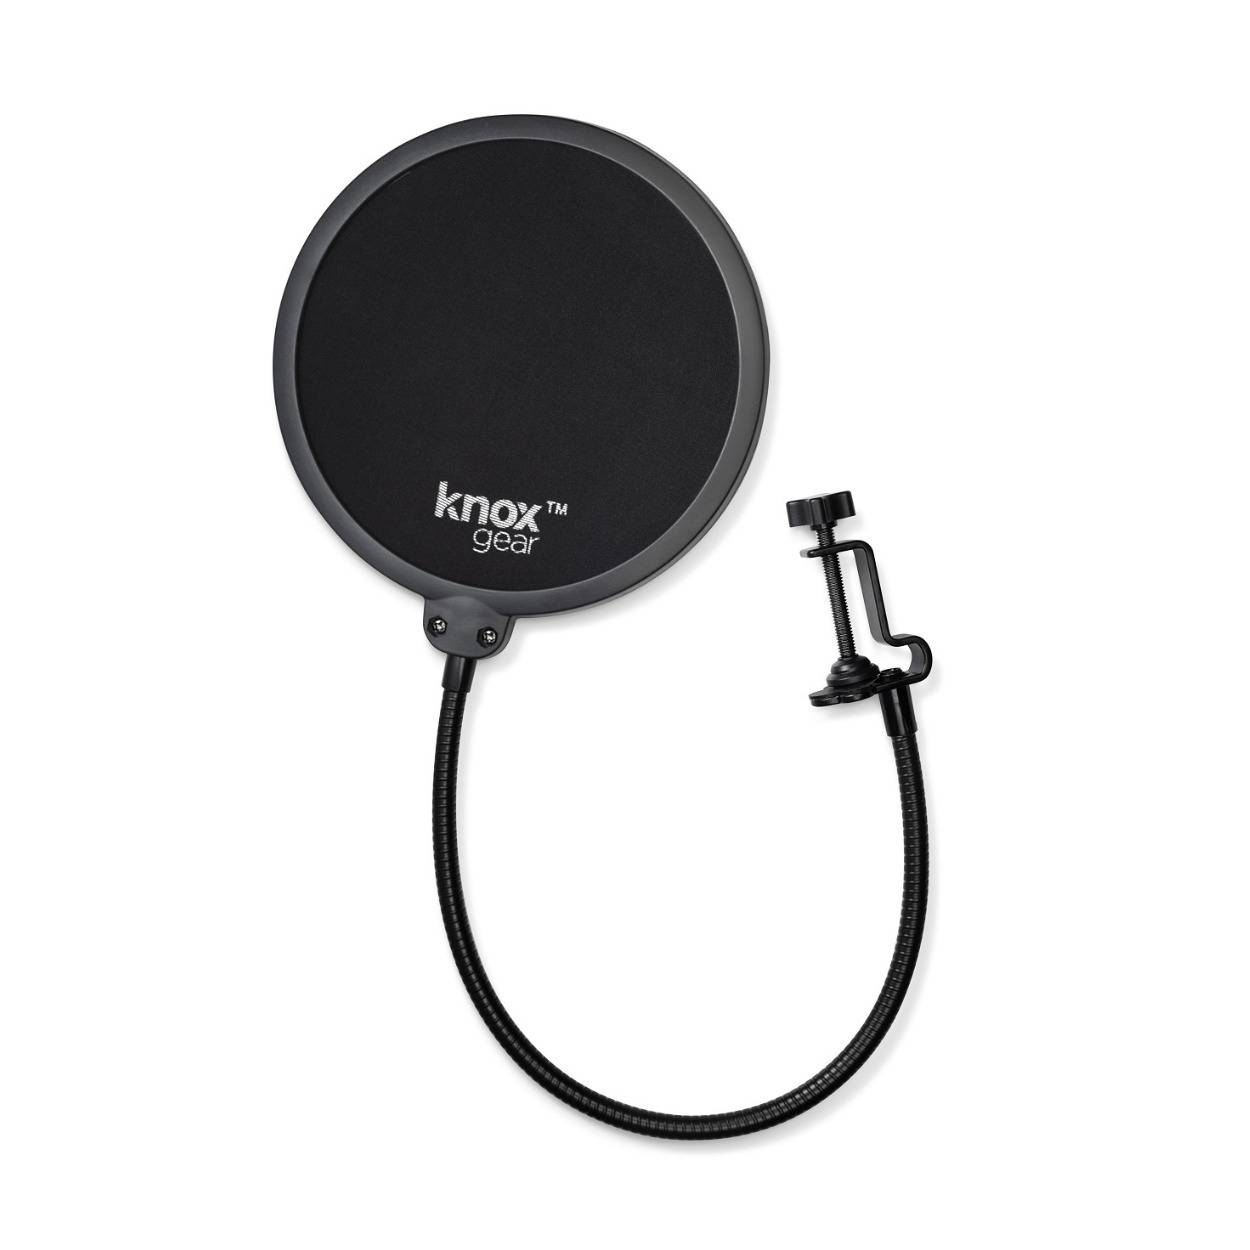 Knox Gear Pop Filter for Yeti Microphones